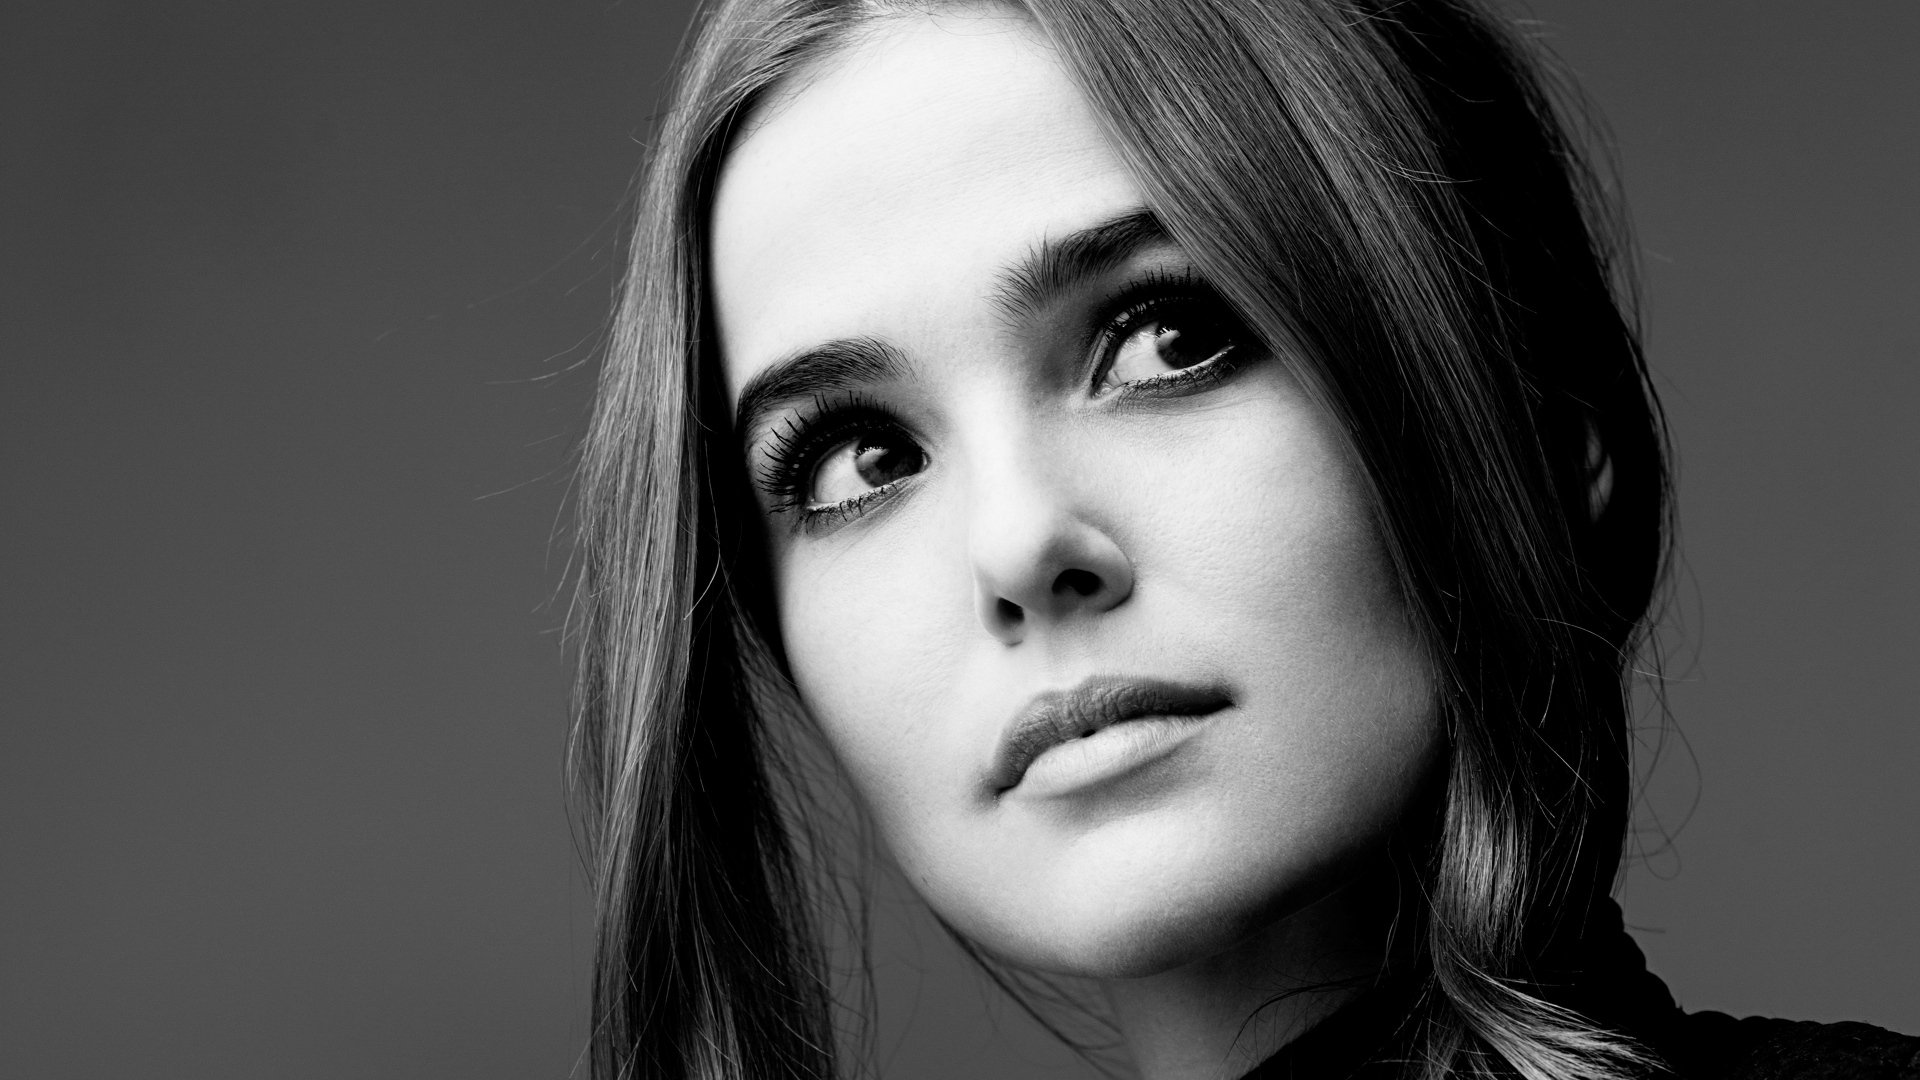 Full HD Wallpaper zoey deutch black and white sight